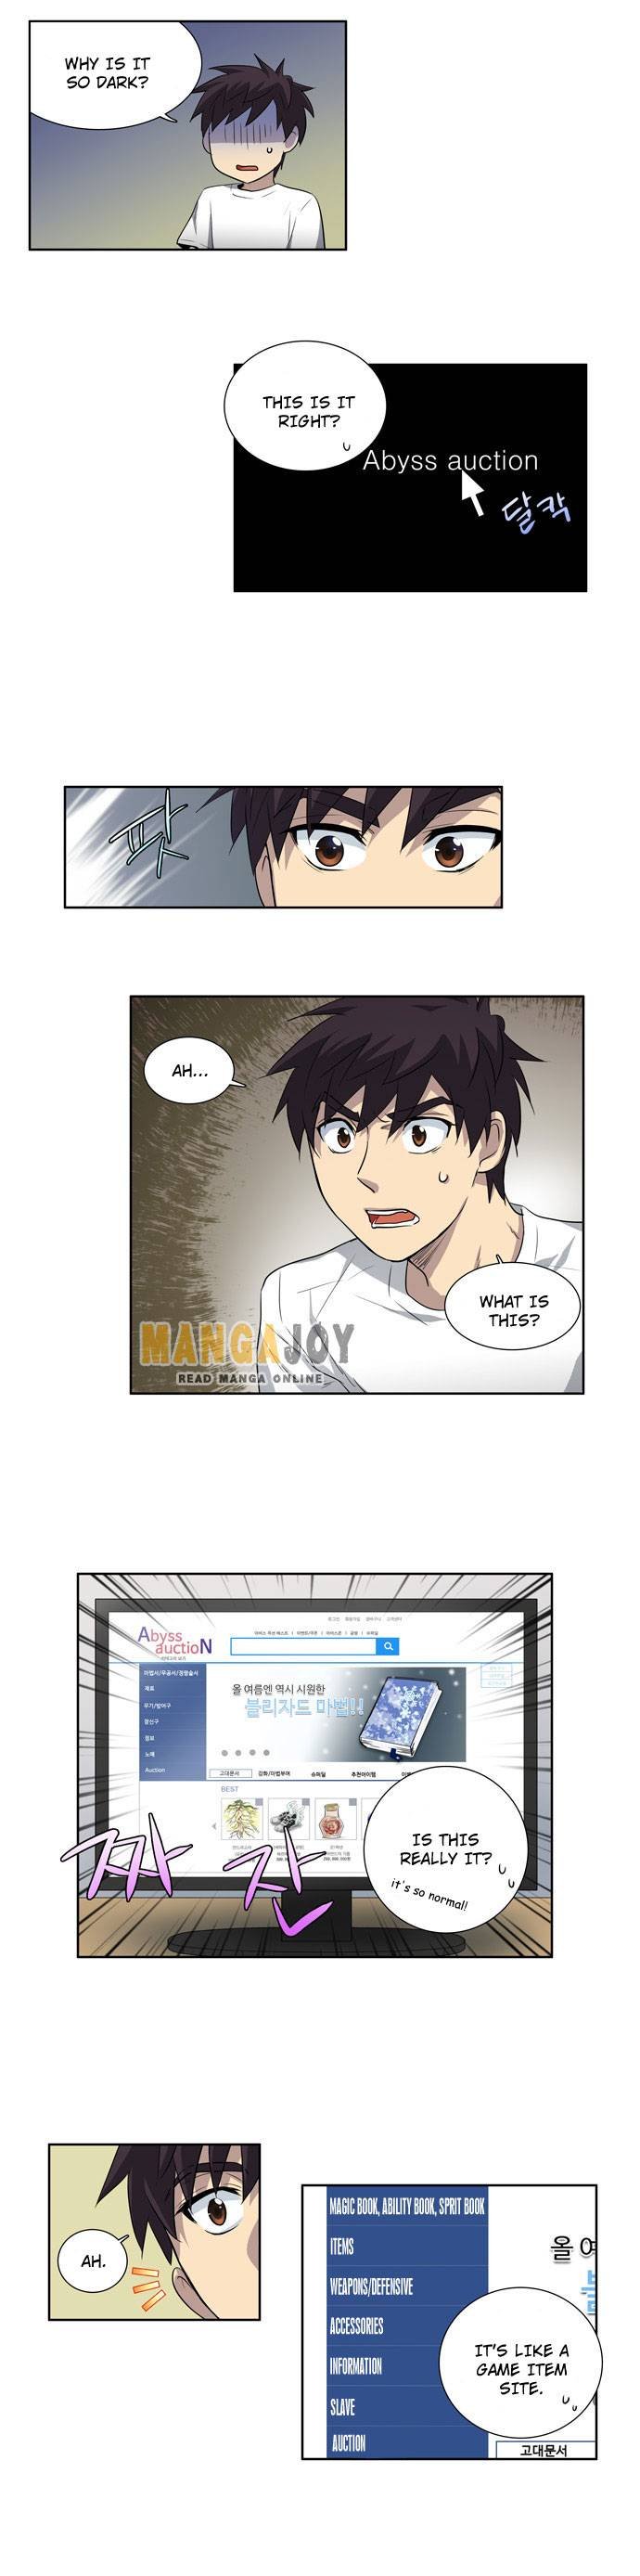 the-gamer-chap-35-9